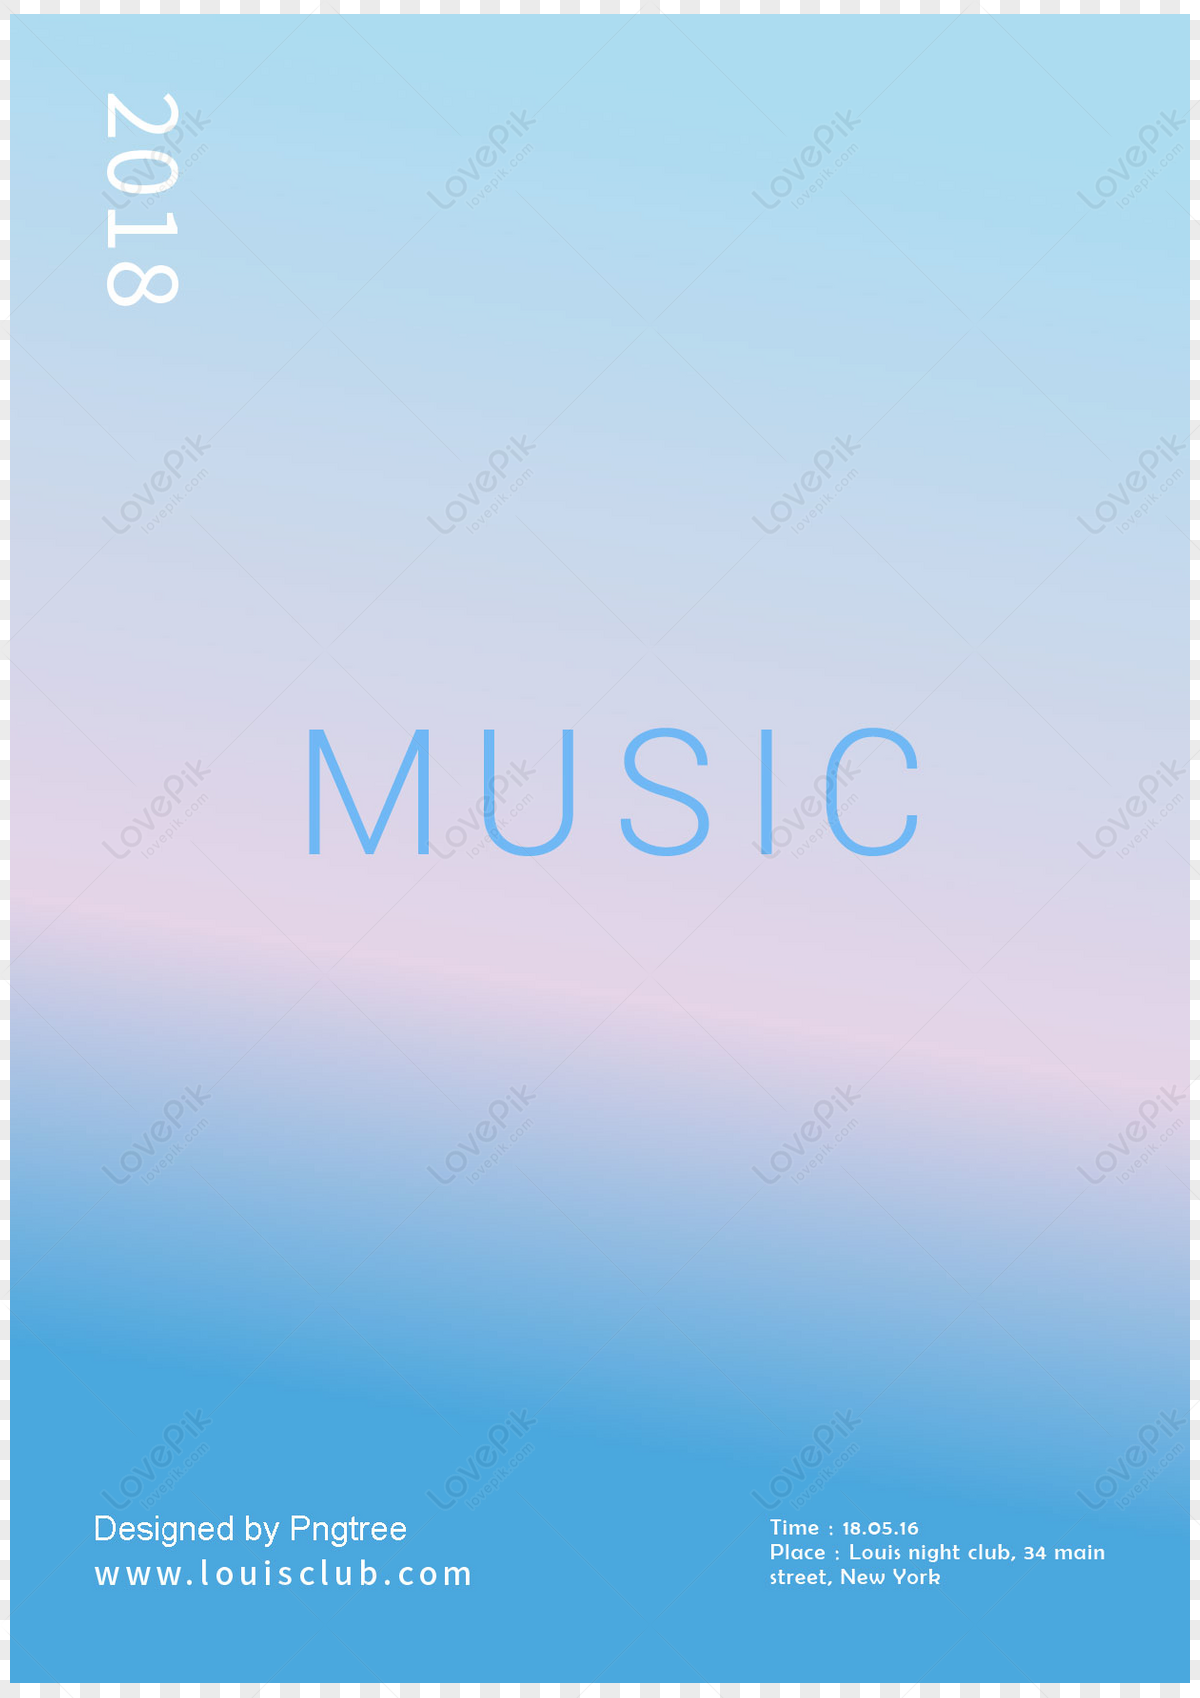 Music Icons PNG Images | 86000+ Vector Icon Packs | Free Download On Pngtree